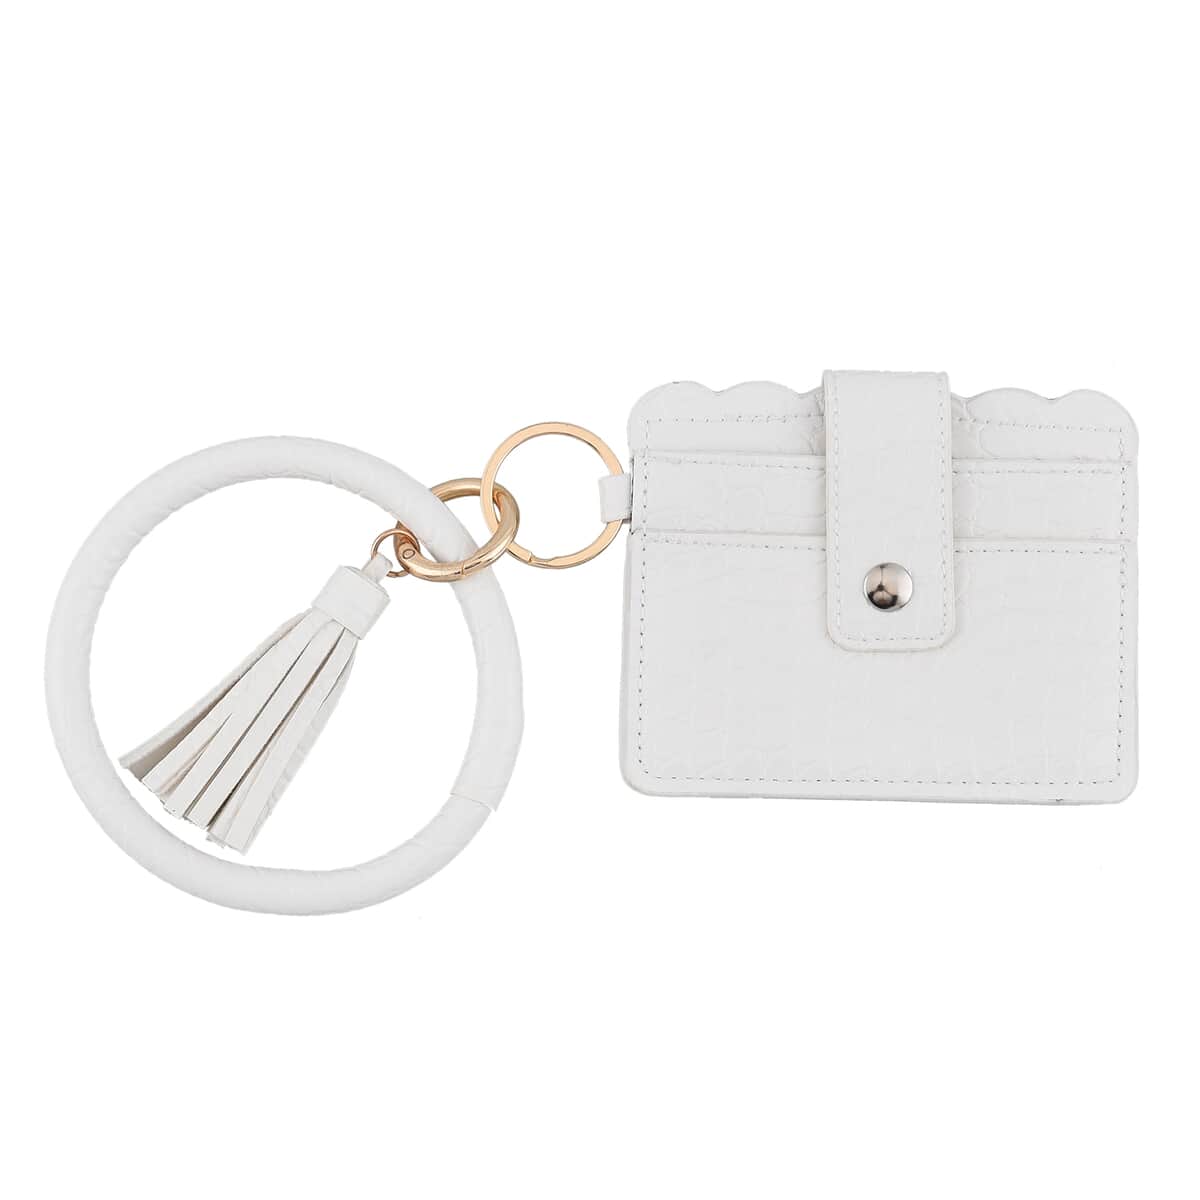 White Faux Leather Cardholder Bangle Key Ring with Tassels image number 0